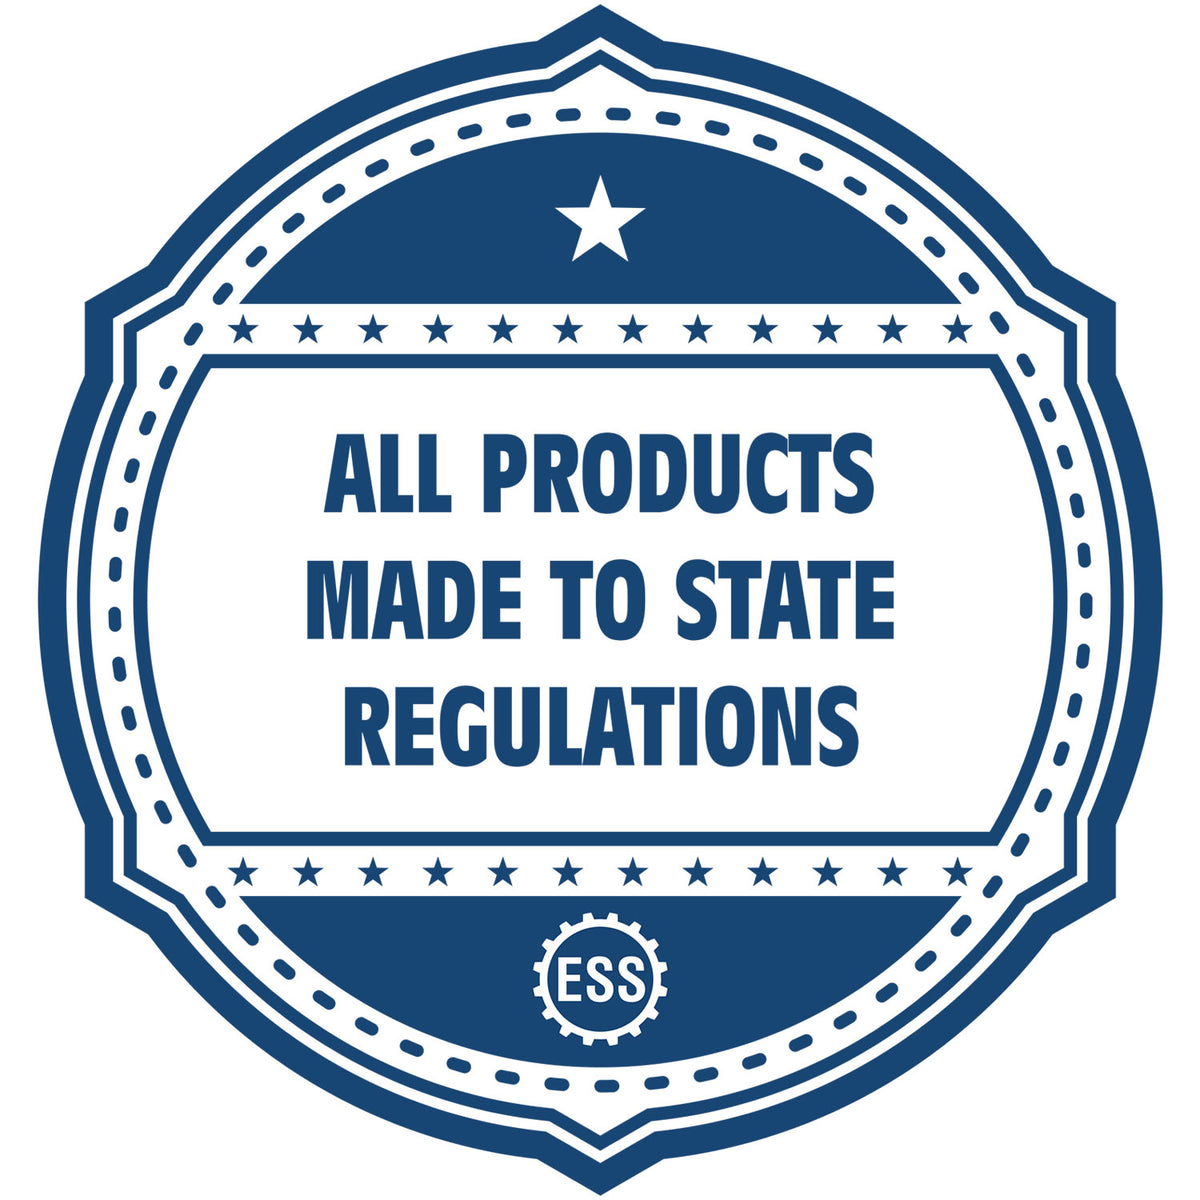 An icon or badge element for the Heavy Duty Cast Iron Maryland Architect Embosser showing that this product is made in compliance with state regulations.